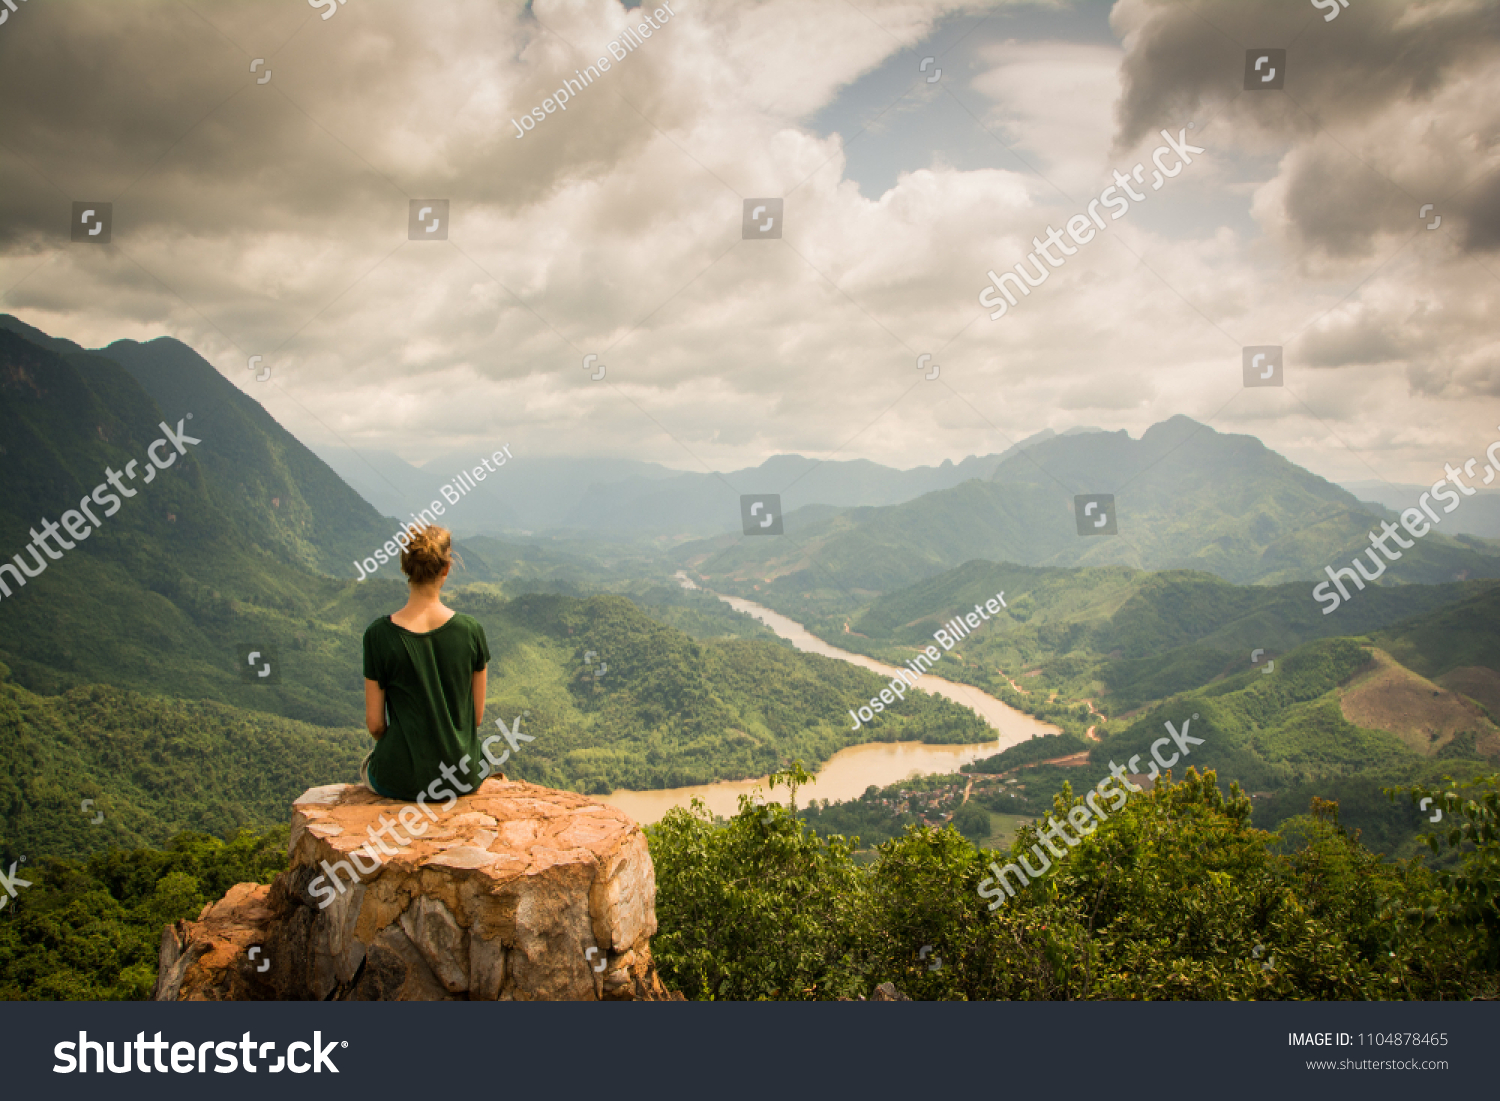 Girl with green shirt sitting on a rock on top of a mountain watching the beautiful scenery of the backcountry of Nong Khiaw, Laos. Location: Viewpoint in Nong Khiaw.  #1104878465